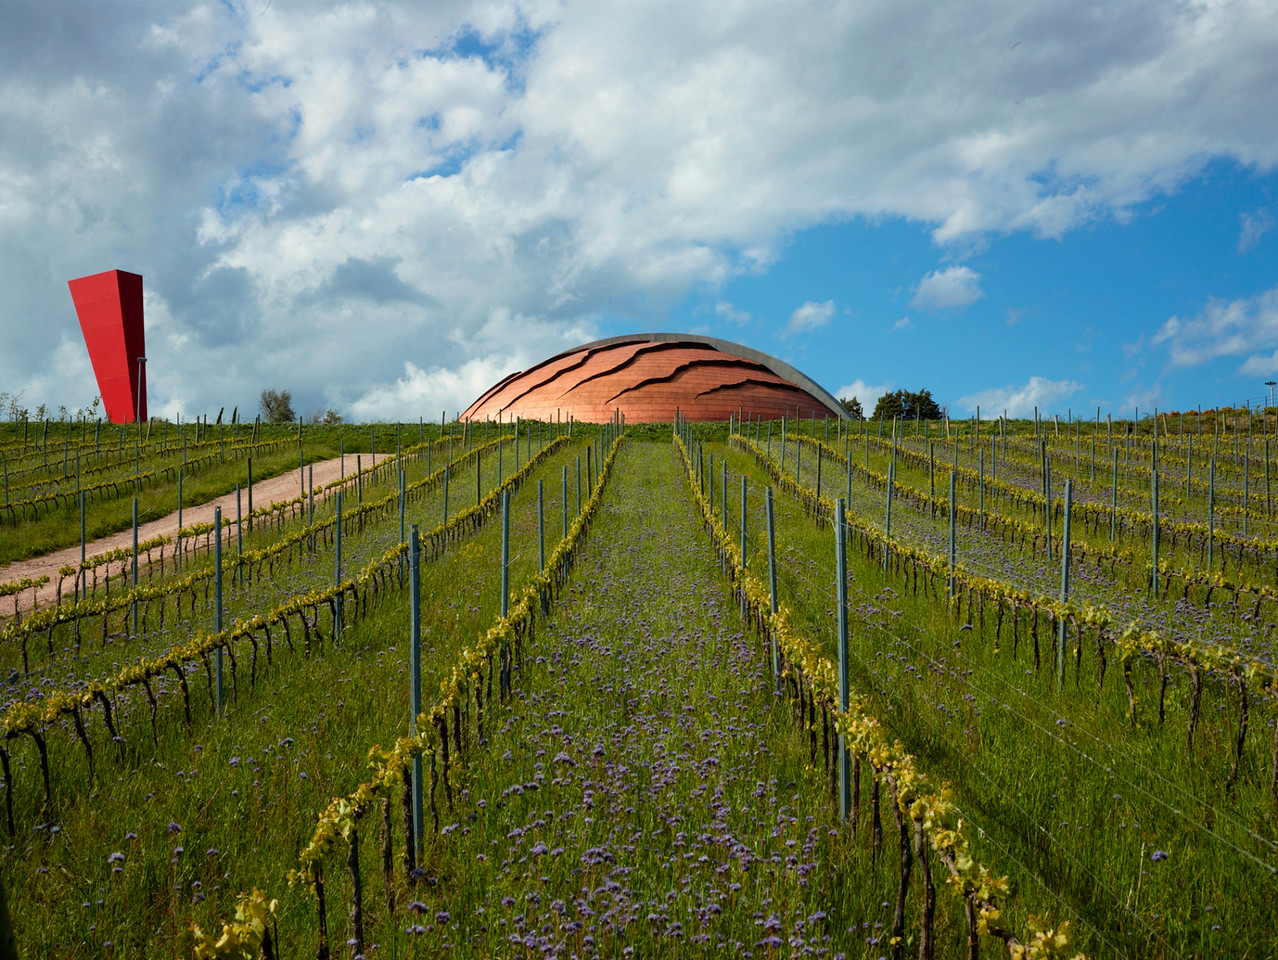 The Carapace was honored as a “phenomenal winery” while Lampante is counted as one of the top wines in Italy